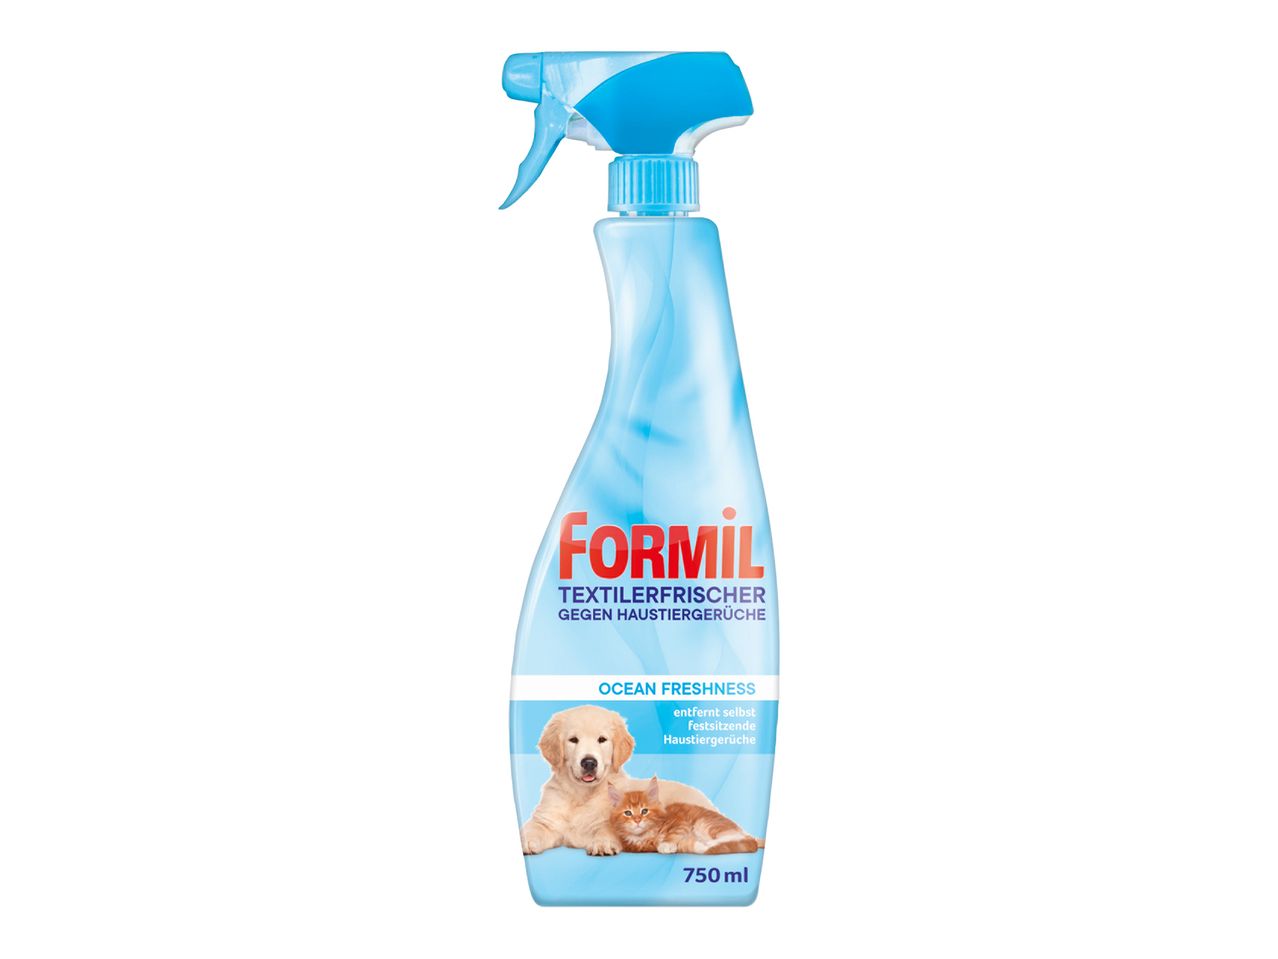 Go to full screen view: Formil Fabric Freshener - Image 2